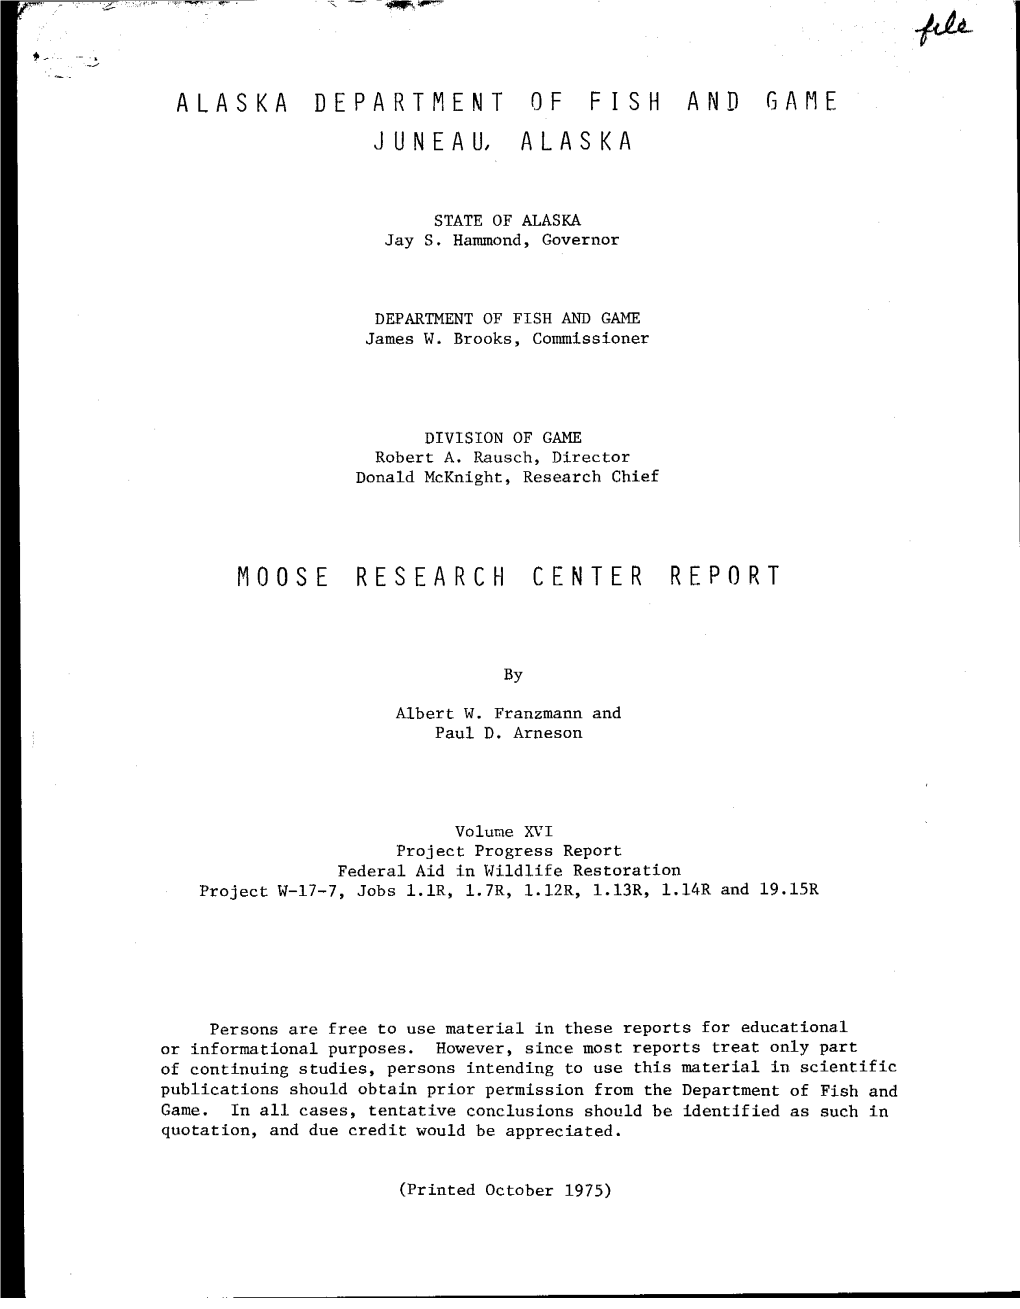 Moose Research Center Report, Volume XVI, Project Progress Report Federal Aid in Wildlife Restoration Project W-17-7, Jobs 1.1R